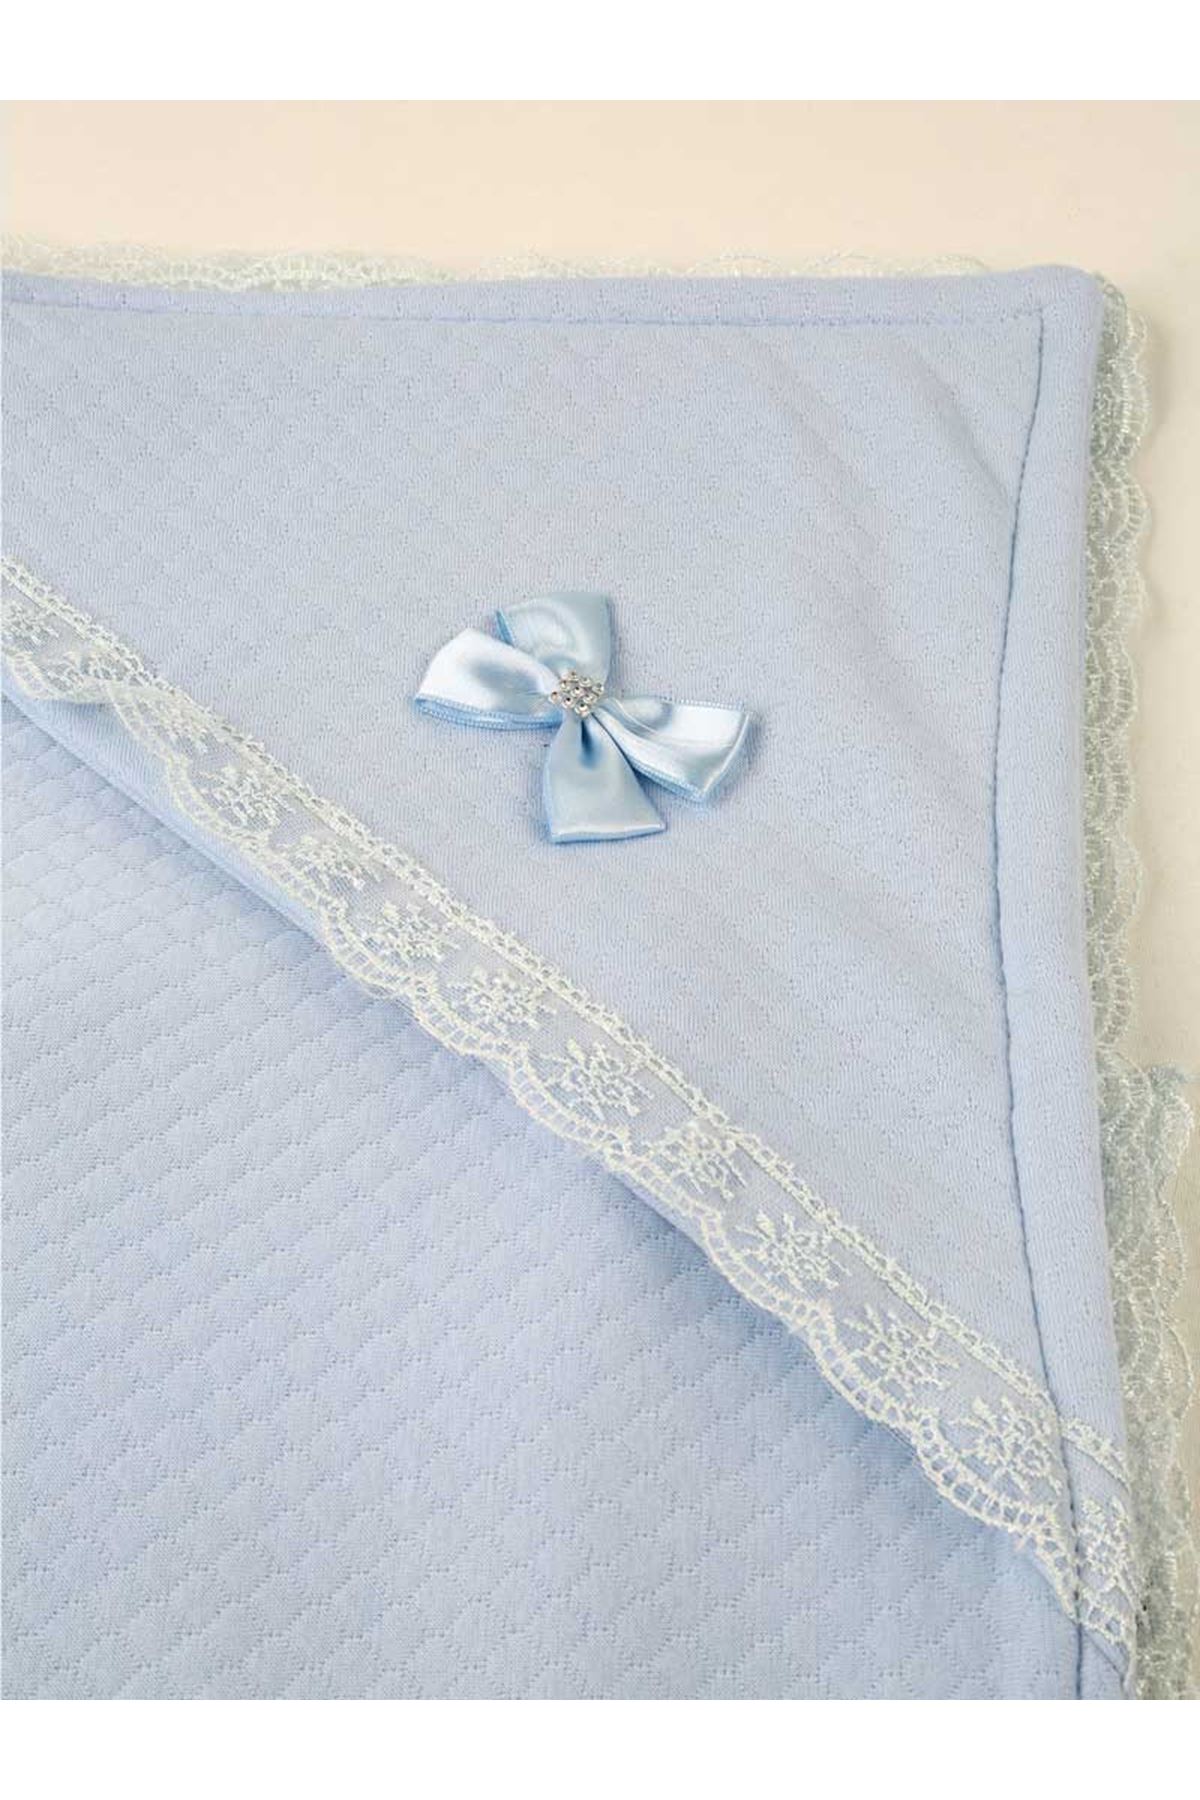 Blue 85 X85 cm Male Baby Swaddle Blanket